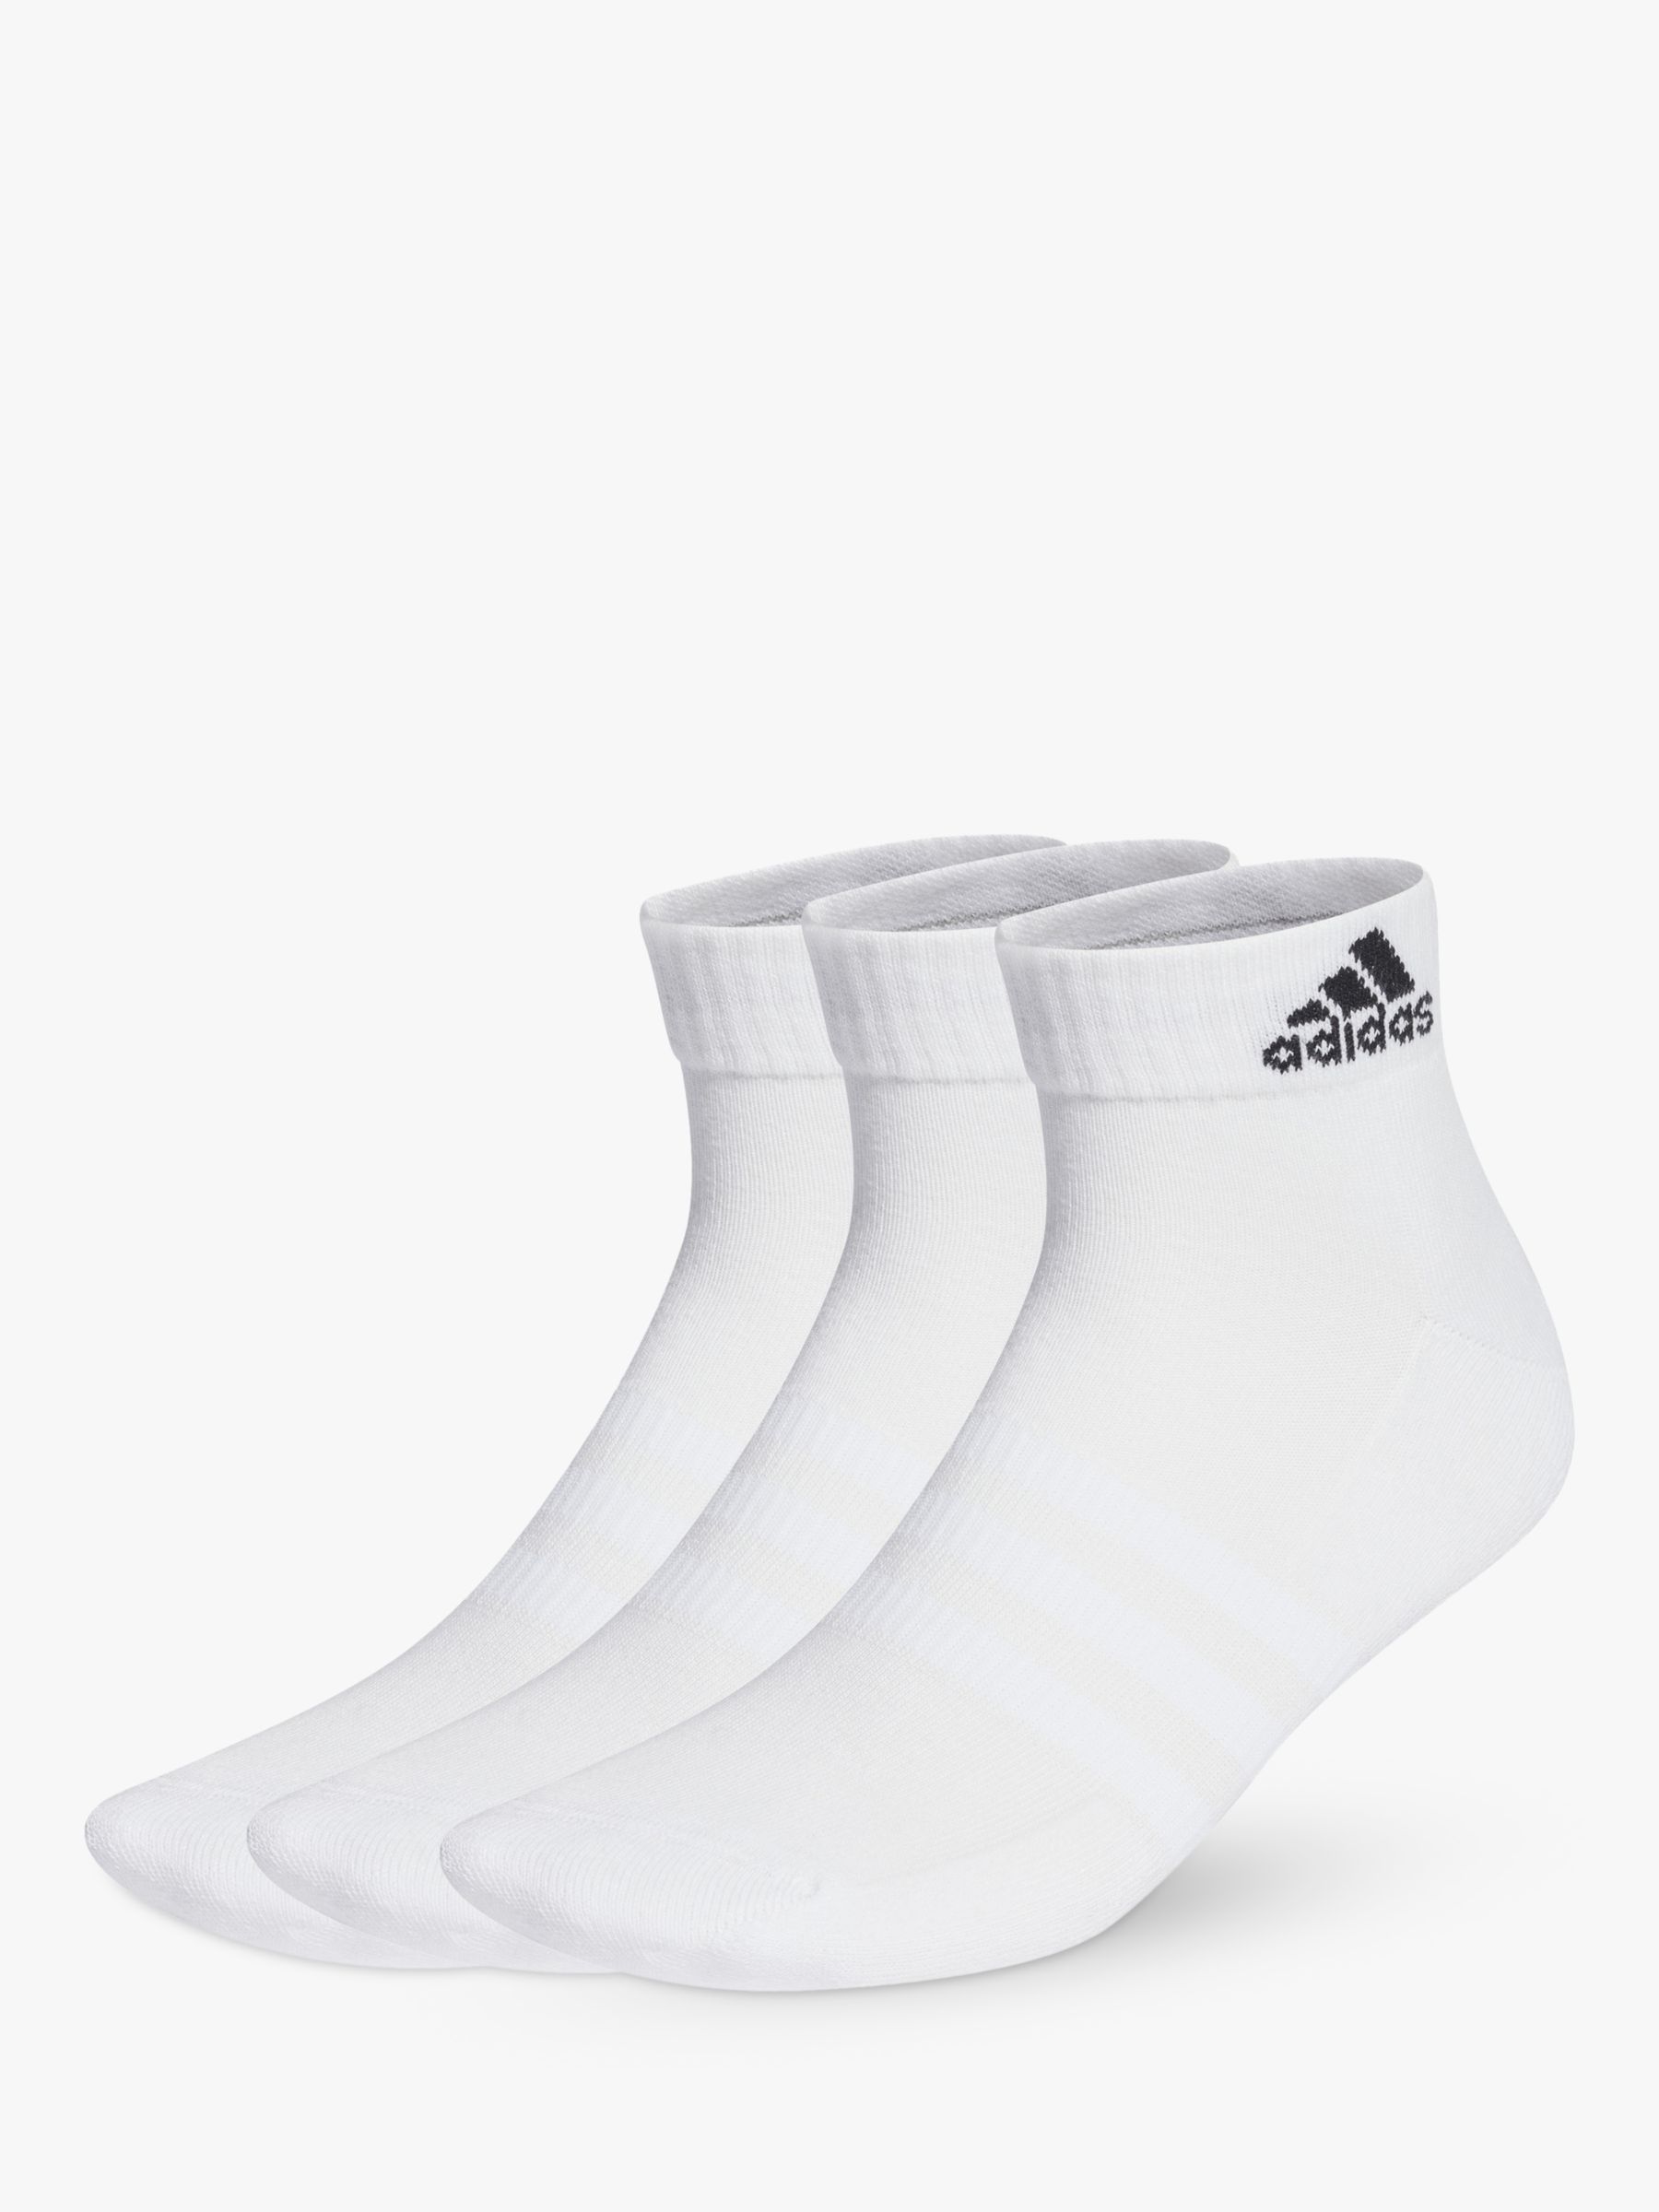 Buy adidas Cushioned Ankle Socks, Pack of 3, White/Black Online at johnlewis.com